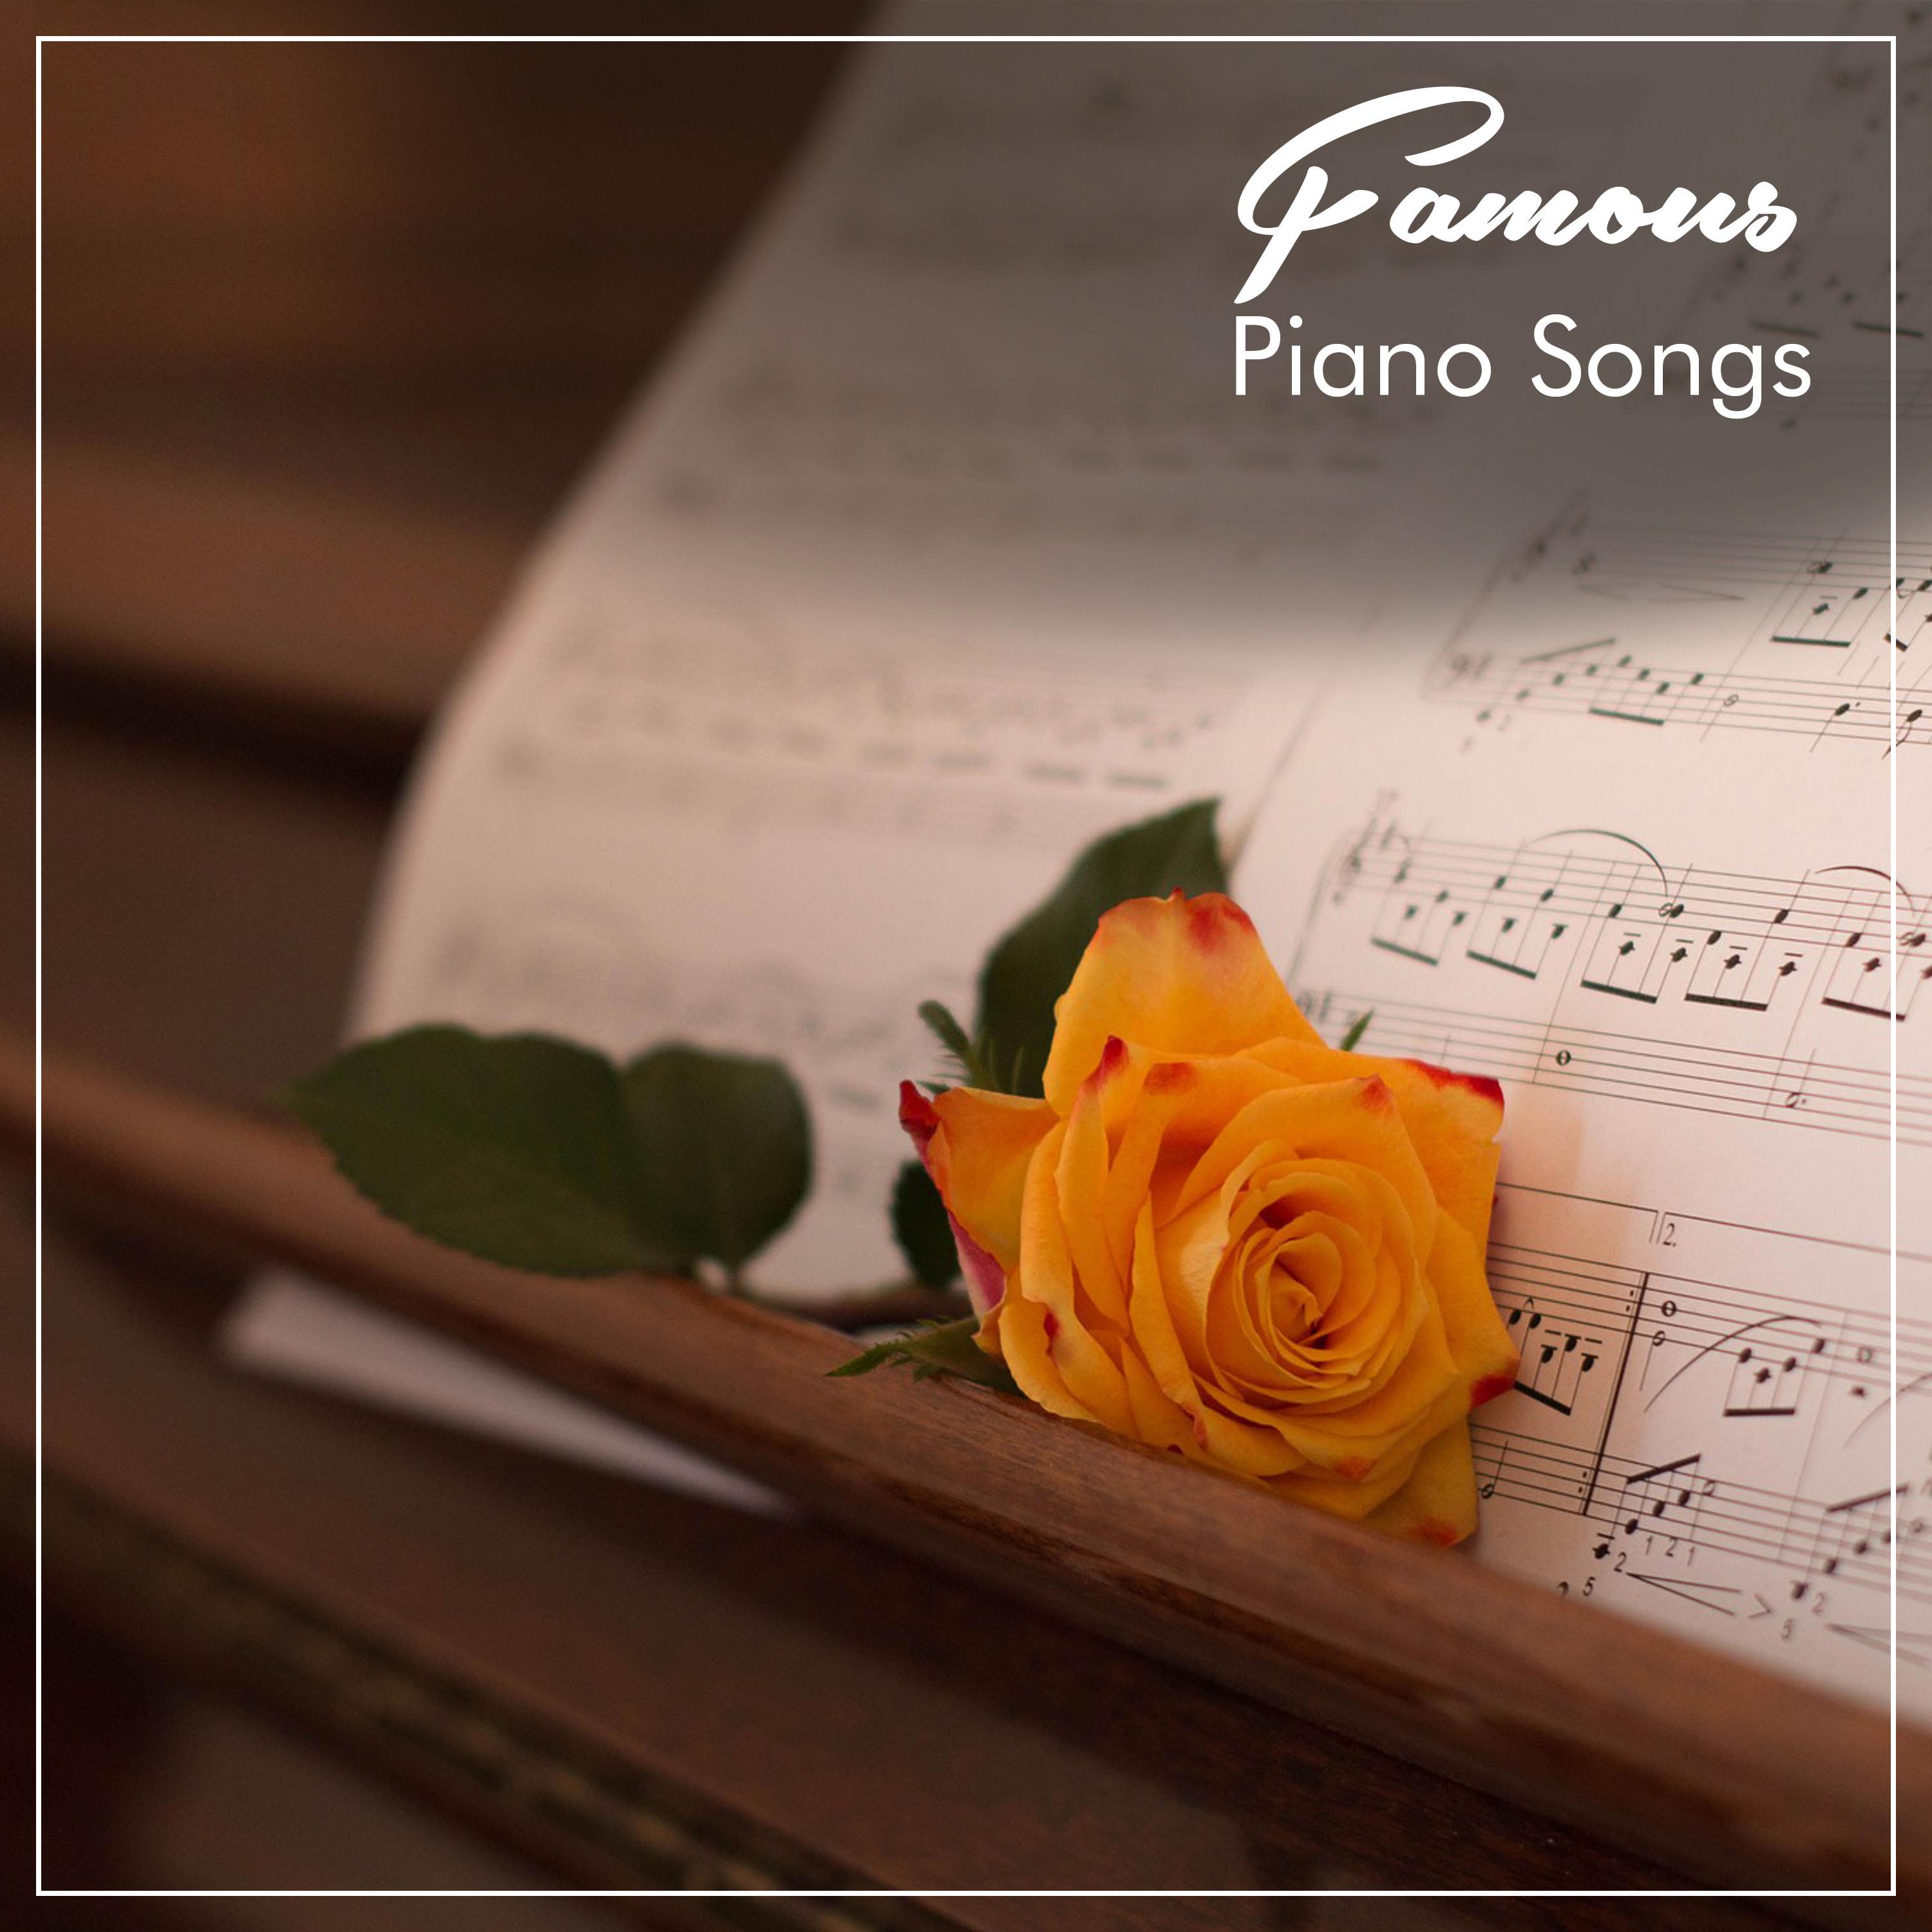 #20 Famous Piano Songs